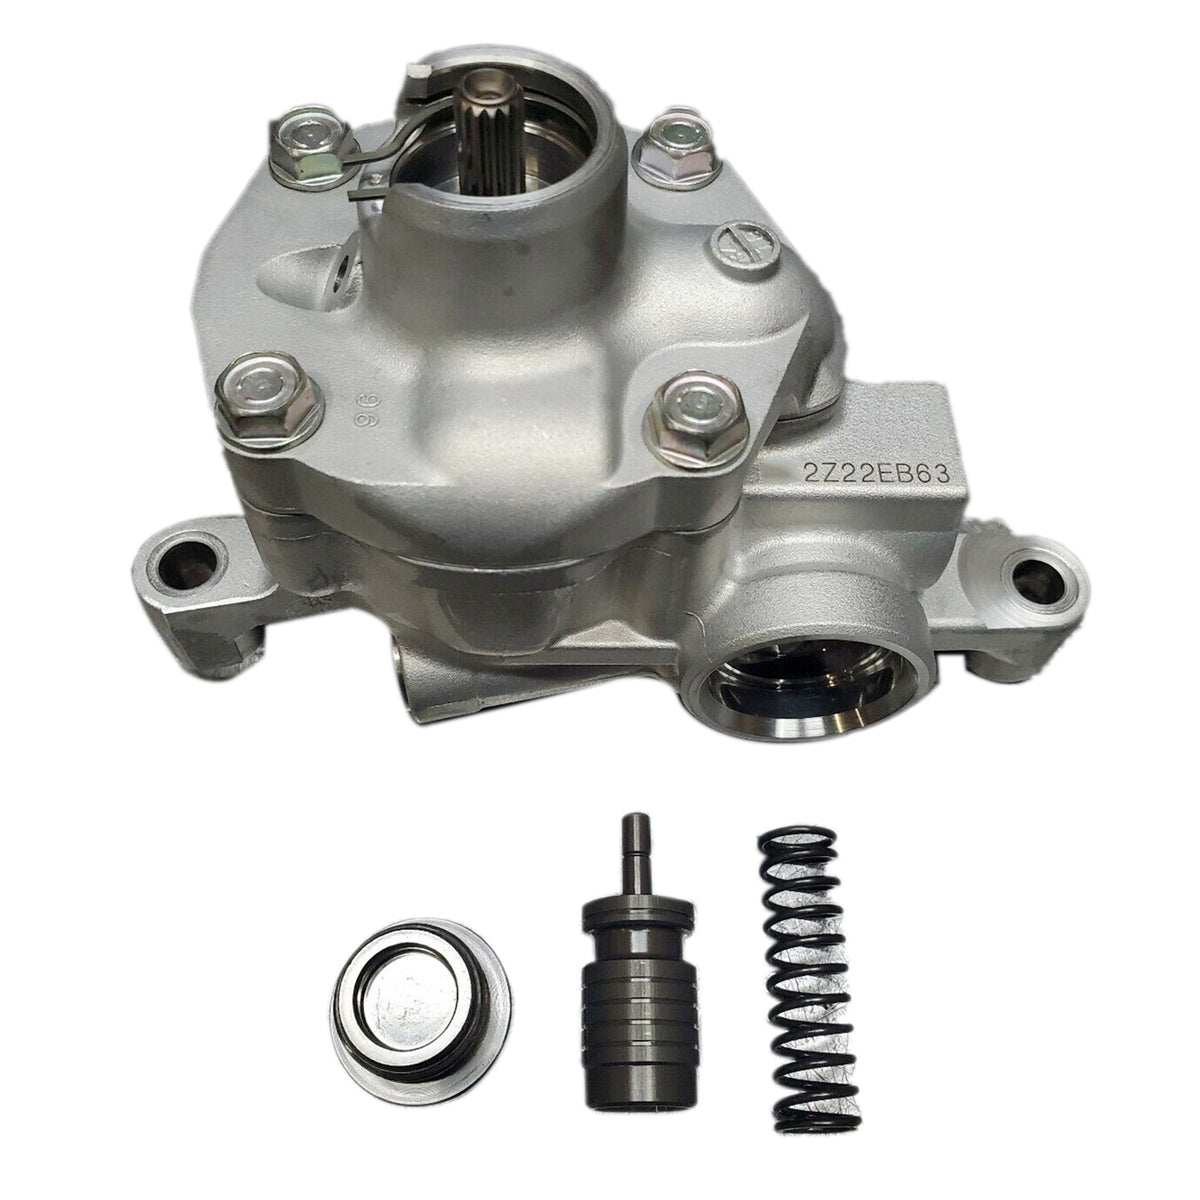 Daysyore Transmission Oil Pump Assy With Valve RE0F11A for 2012-UP Nissan Sentra